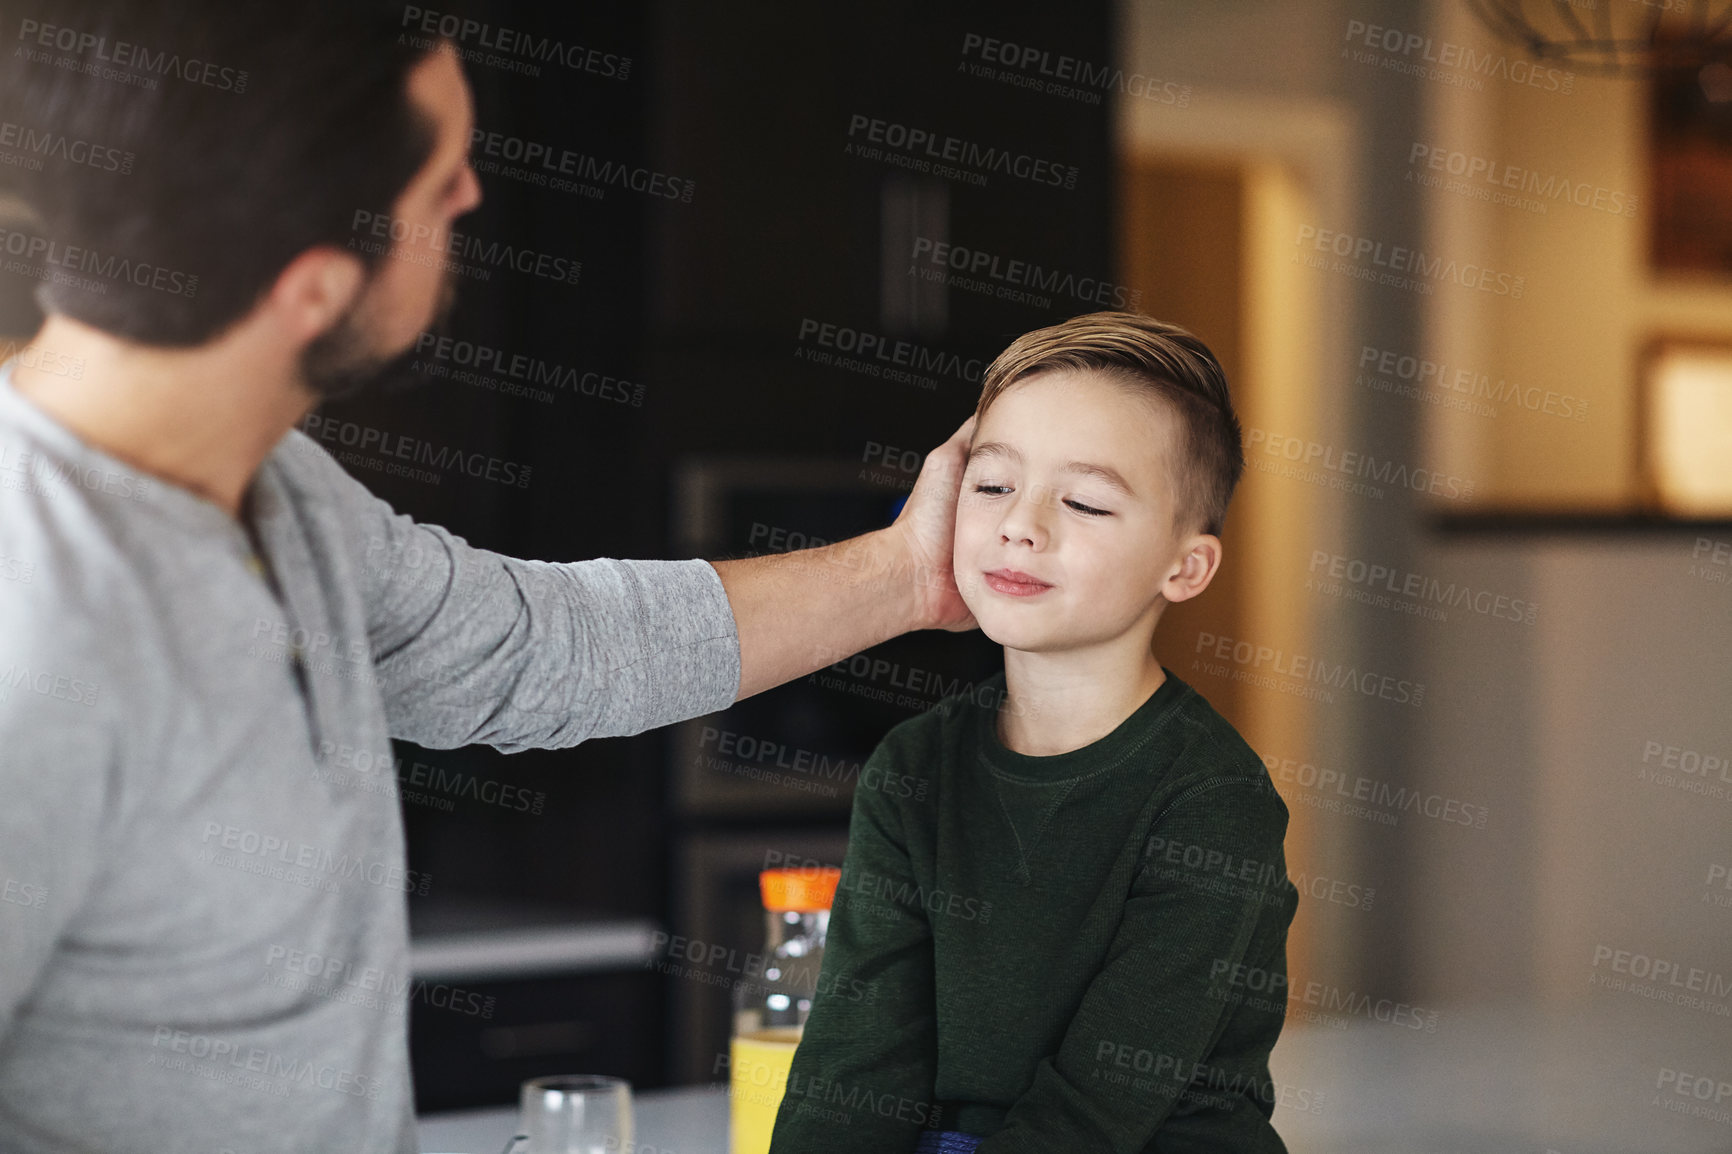 Buy stock photo Cropped shot of a handsome young man talking to his son while standing in the kitchen